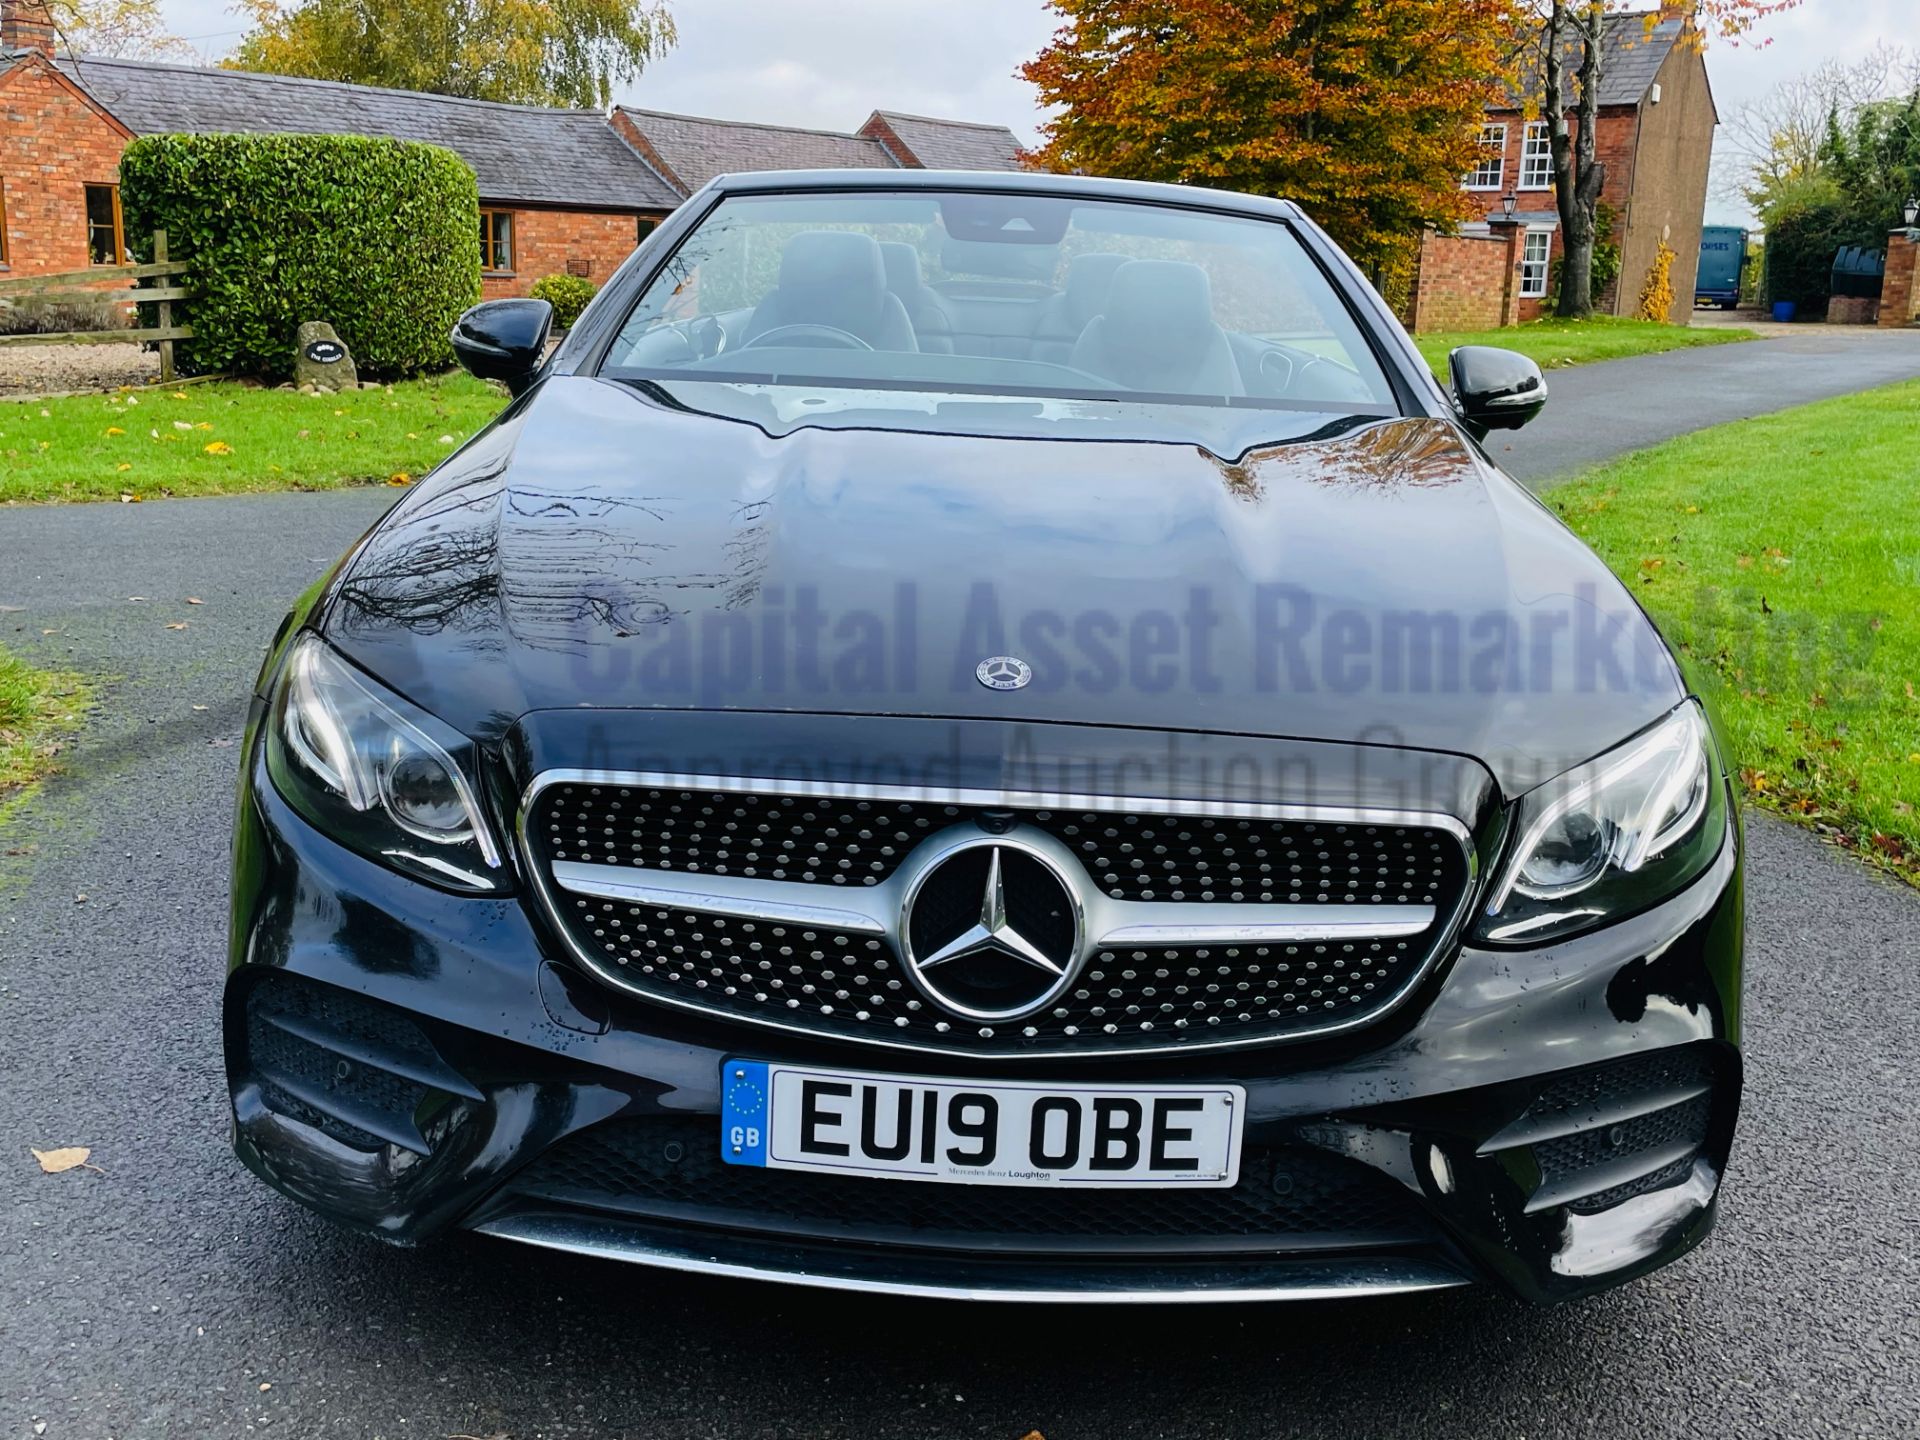 MERCEDES-BENZ E220d *AMG LINE - CABRIOLET* (2019 - EURO 6) '9G TRONIC AUTO - SAT NAV' *FULLY LOADED* - Image 7 of 66